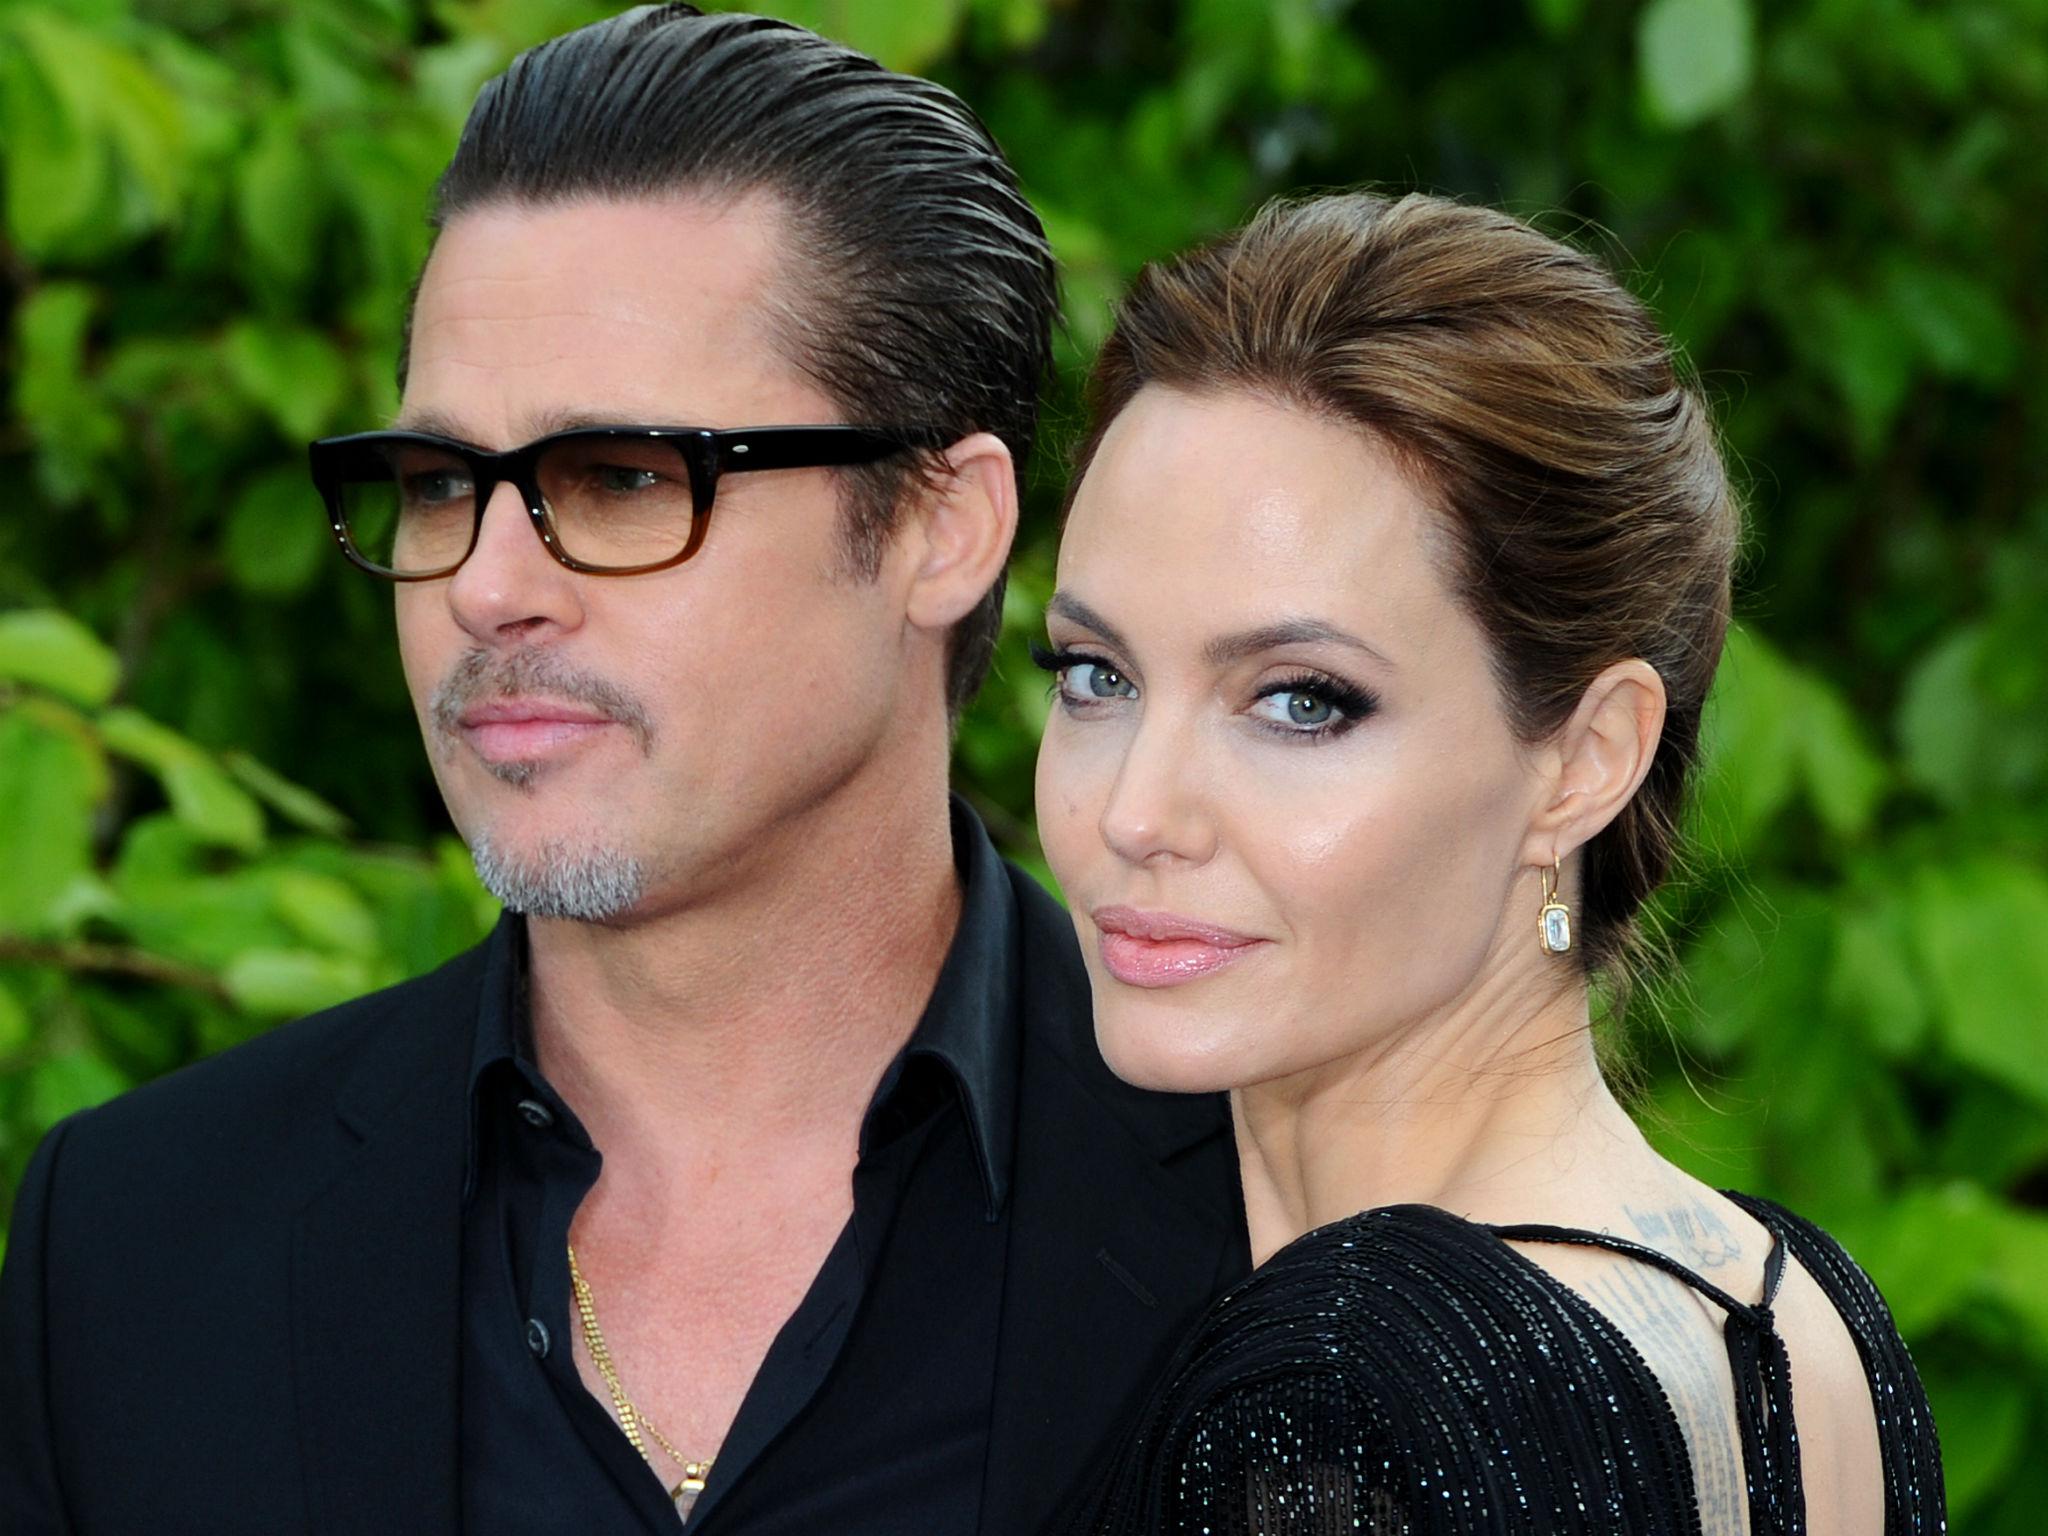 Bokep Angelina Jolie - Angelina Jolie and Brad Pitt divorce was searched for more than porn upon  its announcement | The Independent | The Independent